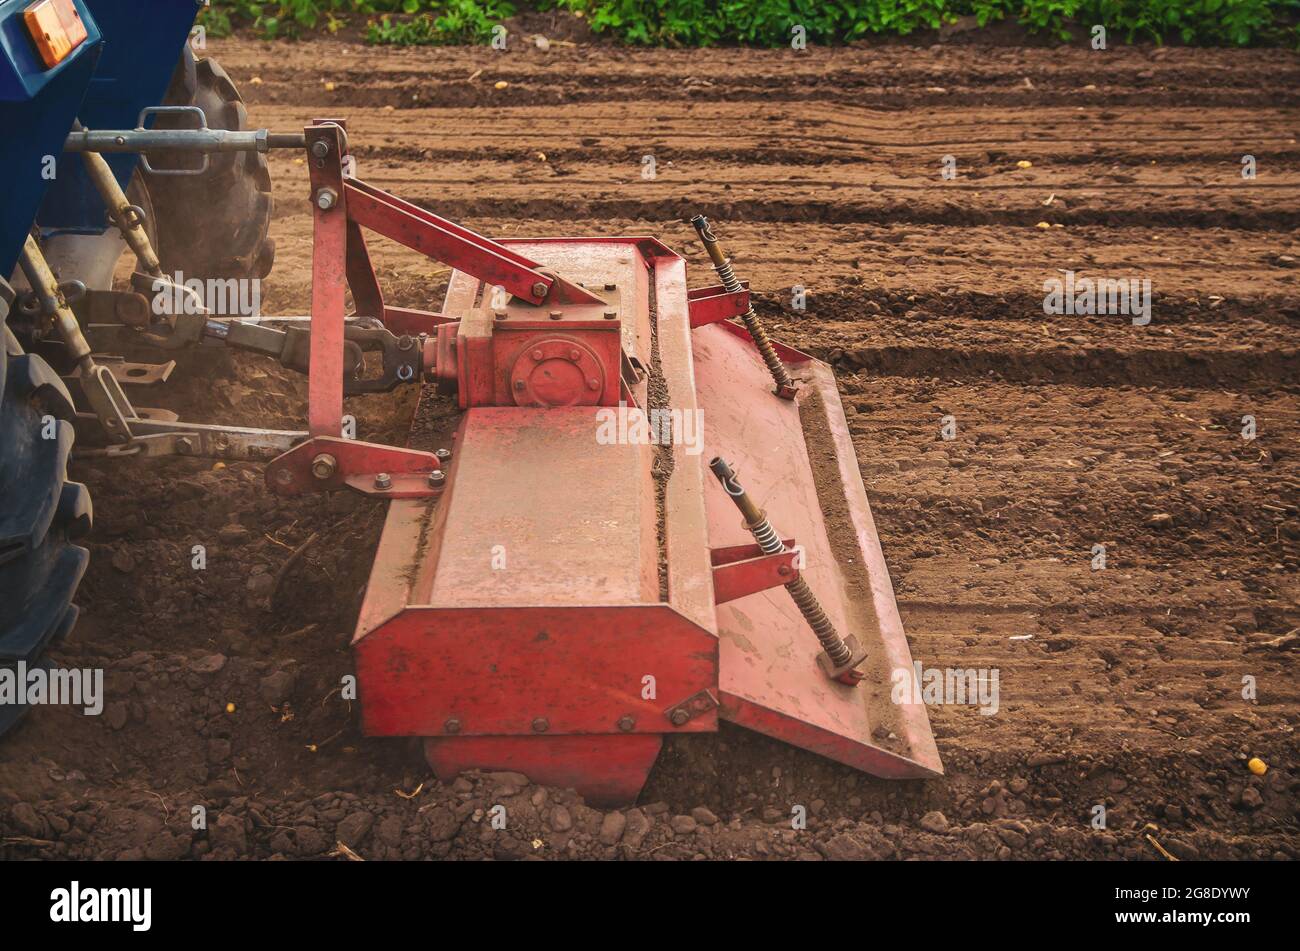 The tractor works the soil of the field by loosening and mixing it. Softening of the soil and destruction of the root system of the previous harvest. Stock Photo